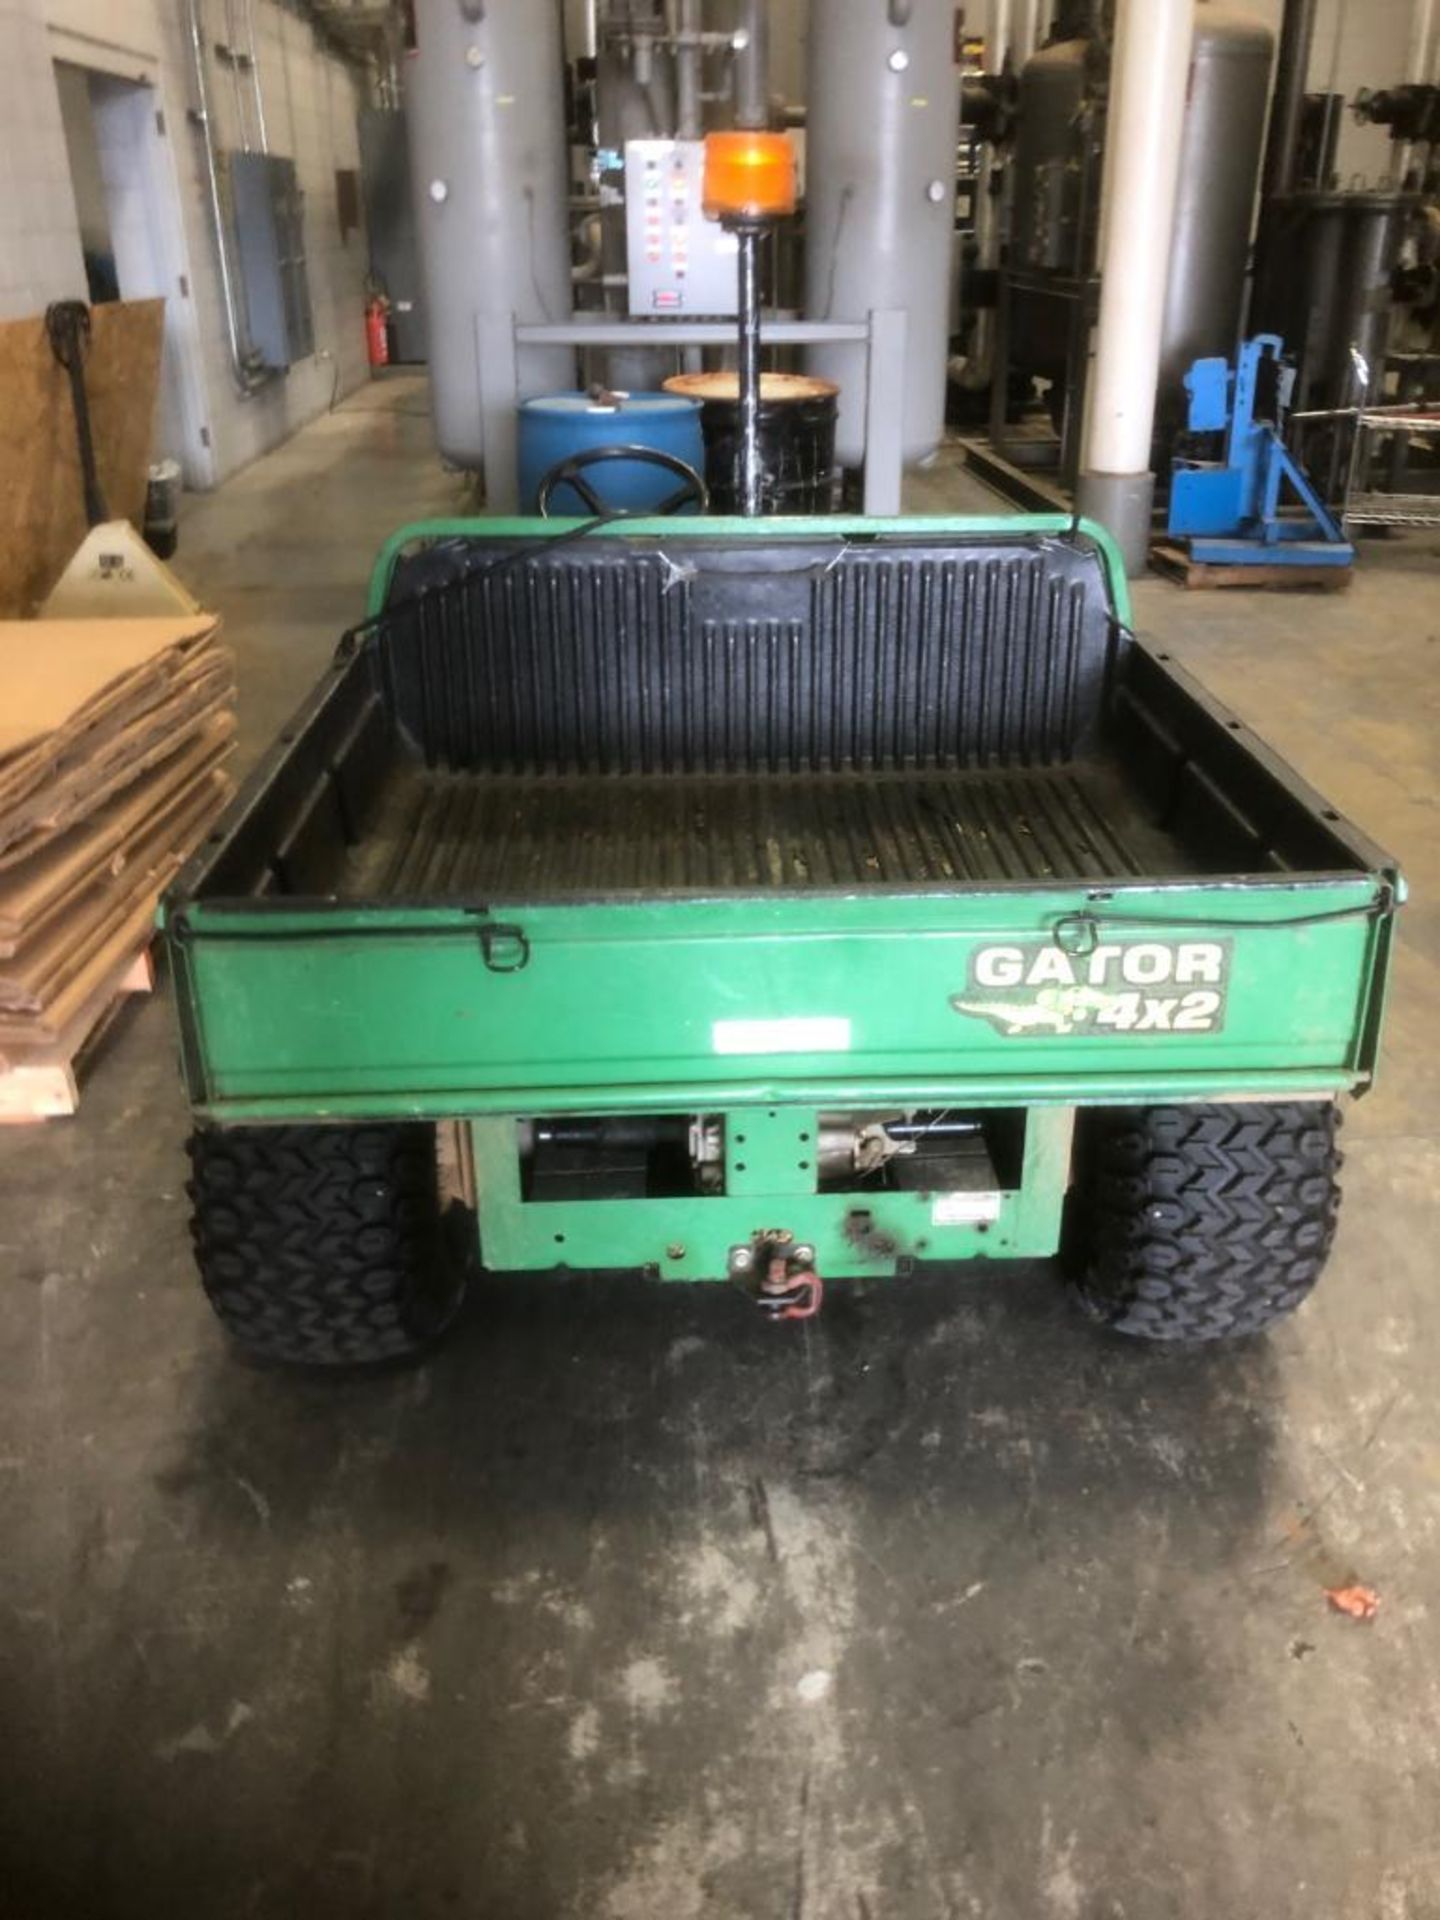 JOHN DEERE GATOR 4X2, DUMP BED, 3,914 HOURS  ***DELAYED REMOVAL UNTIL AUGUST 1ST, BUYER WILL BE - Image 3 of 4